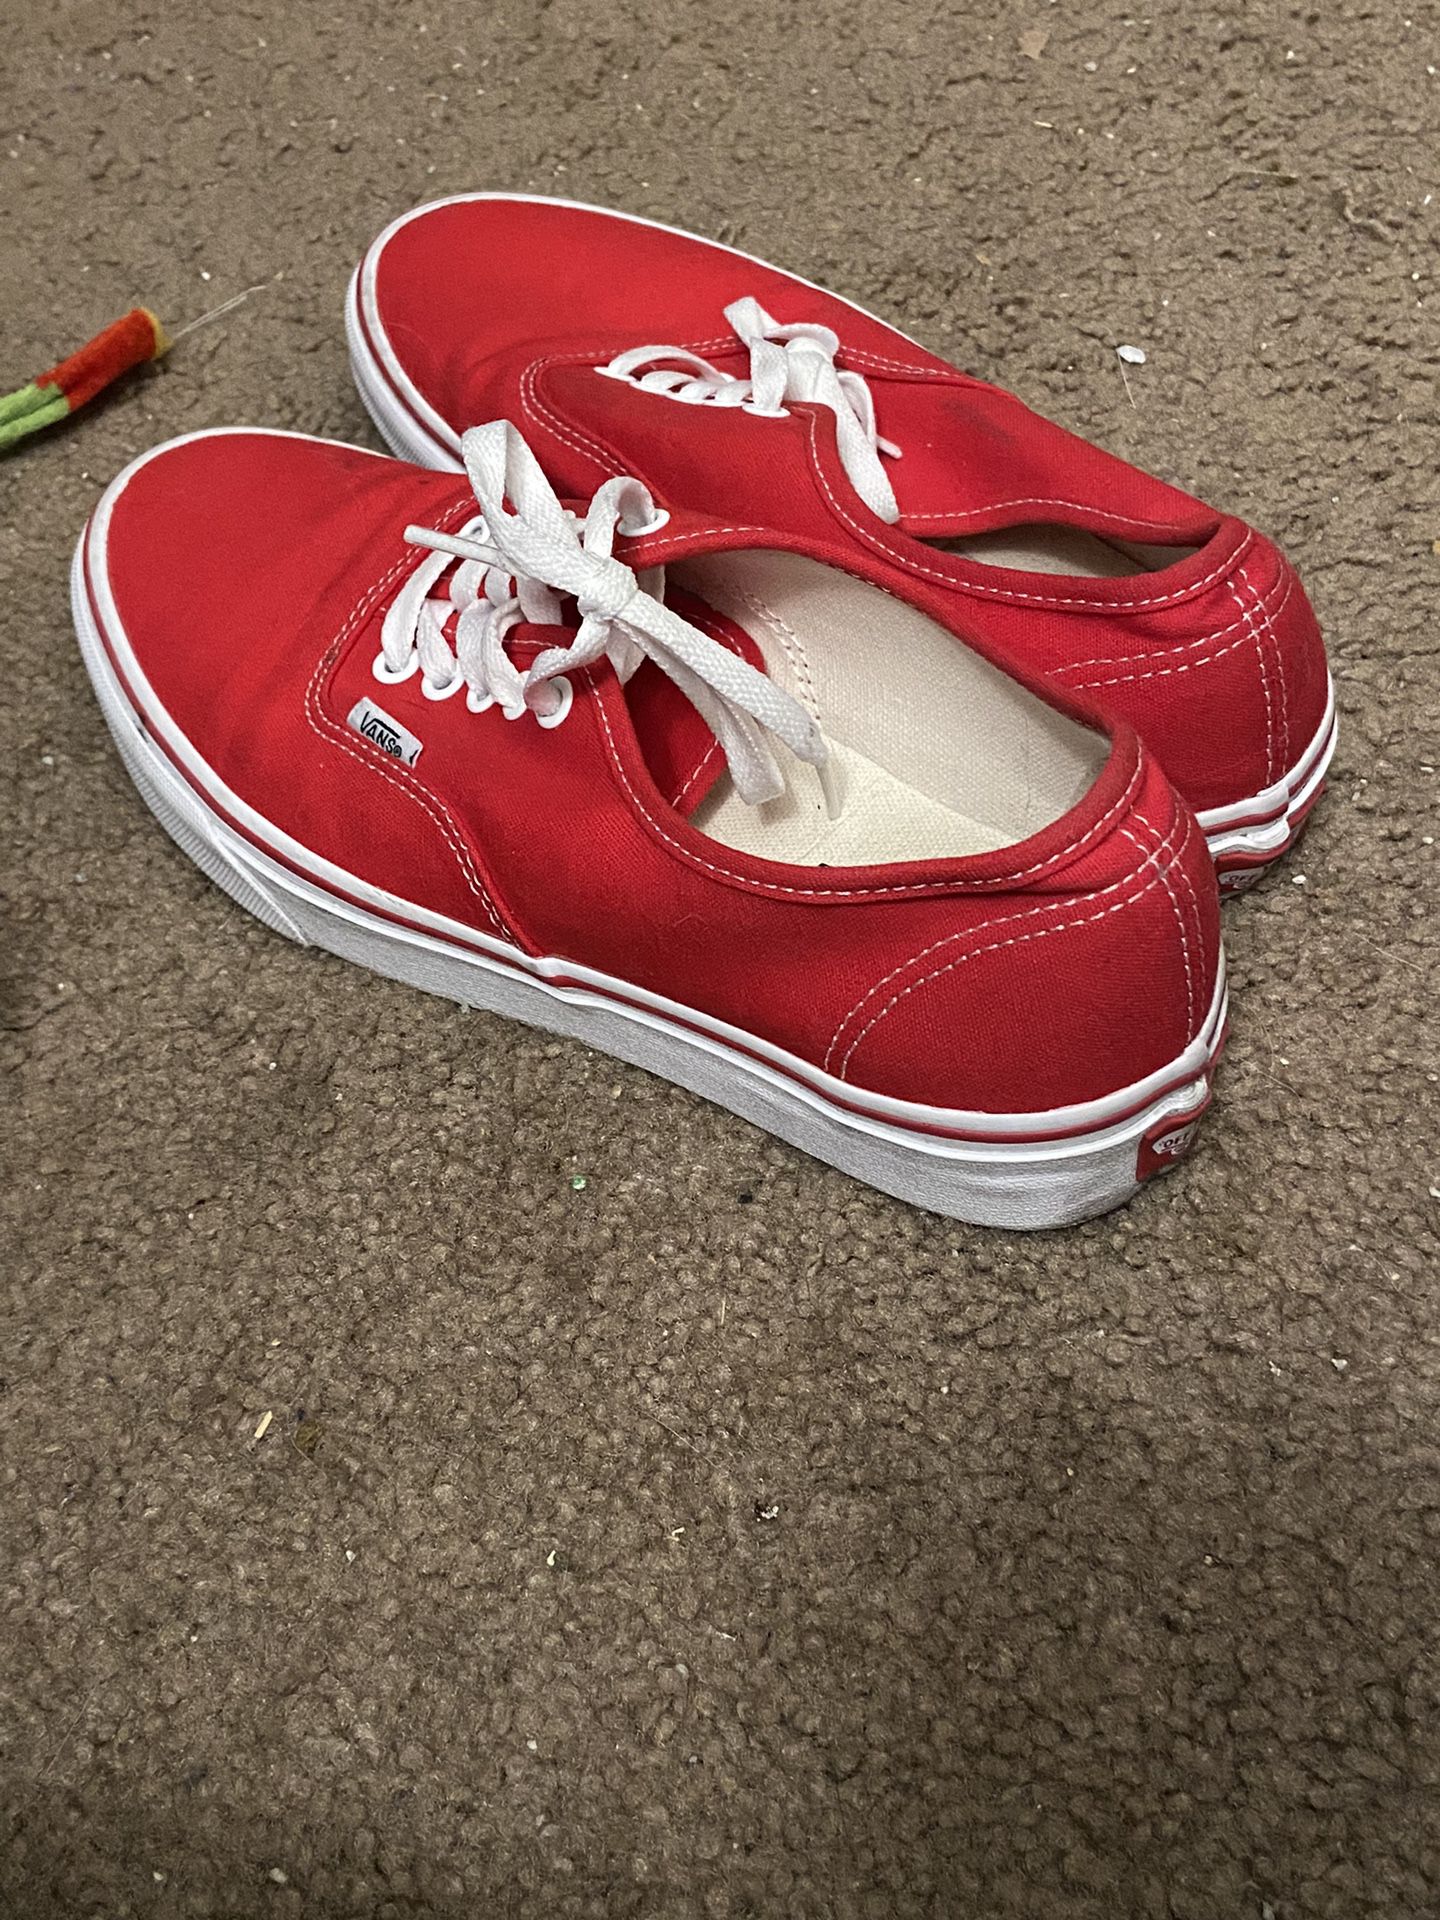 Red vans Shoes Size 10 for Sale in Santa Ana, CA - OfferUp